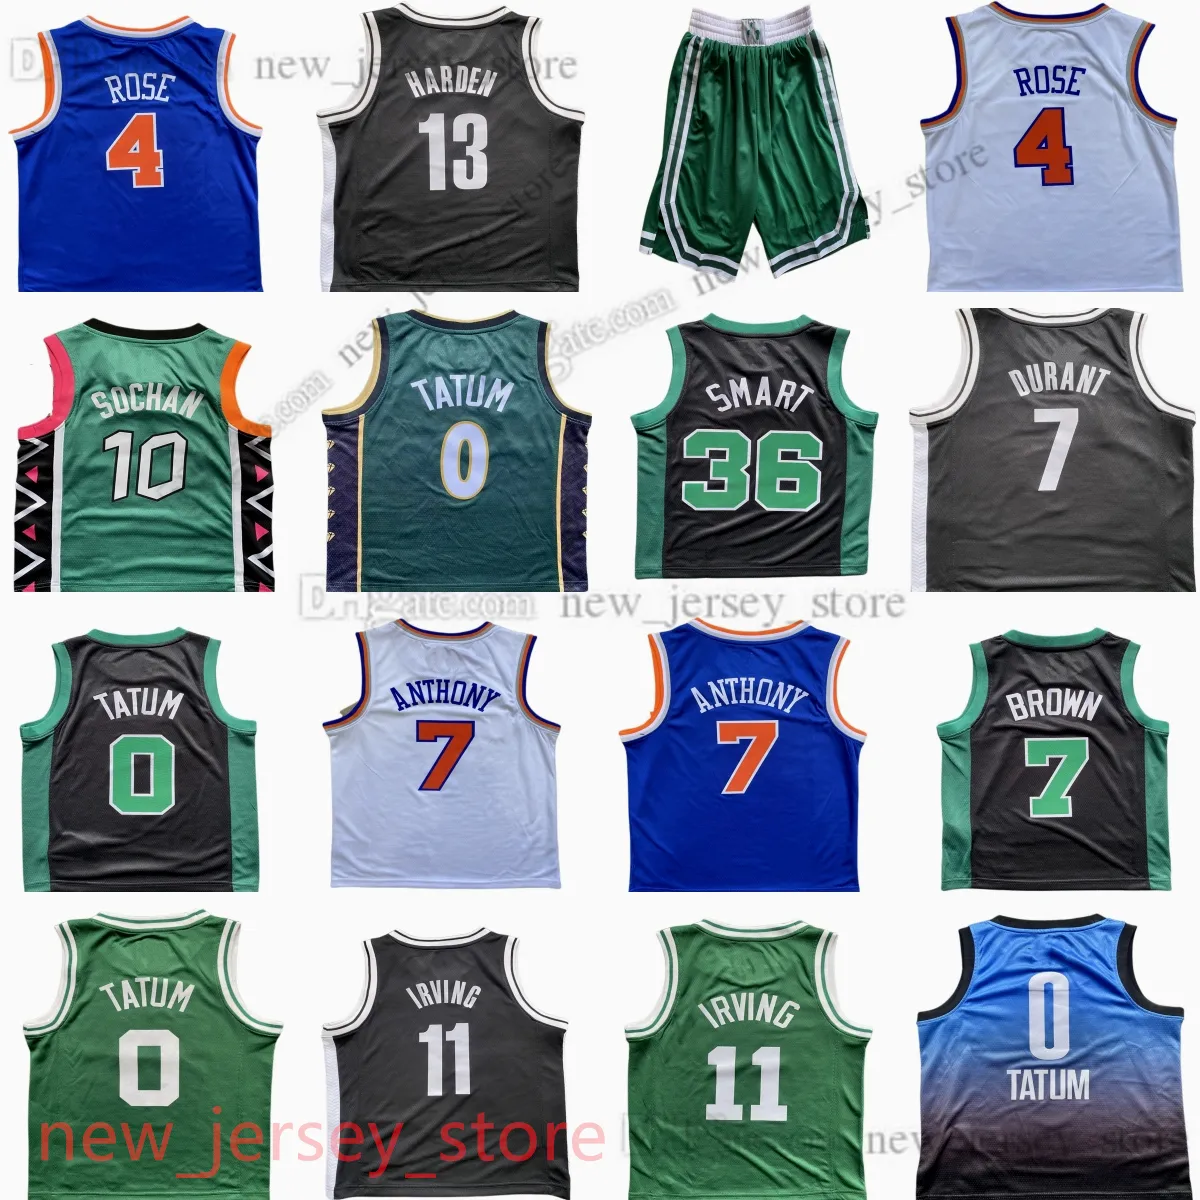 0 Jayson Tatum Jersey Custom Youth Printed Basketball Jersey 7 Jaylen Brown Marcus Smart Derrick Rose Carmelo Anthony Kevin Durant Kyrie Irving Jerseys Shorts S-XL